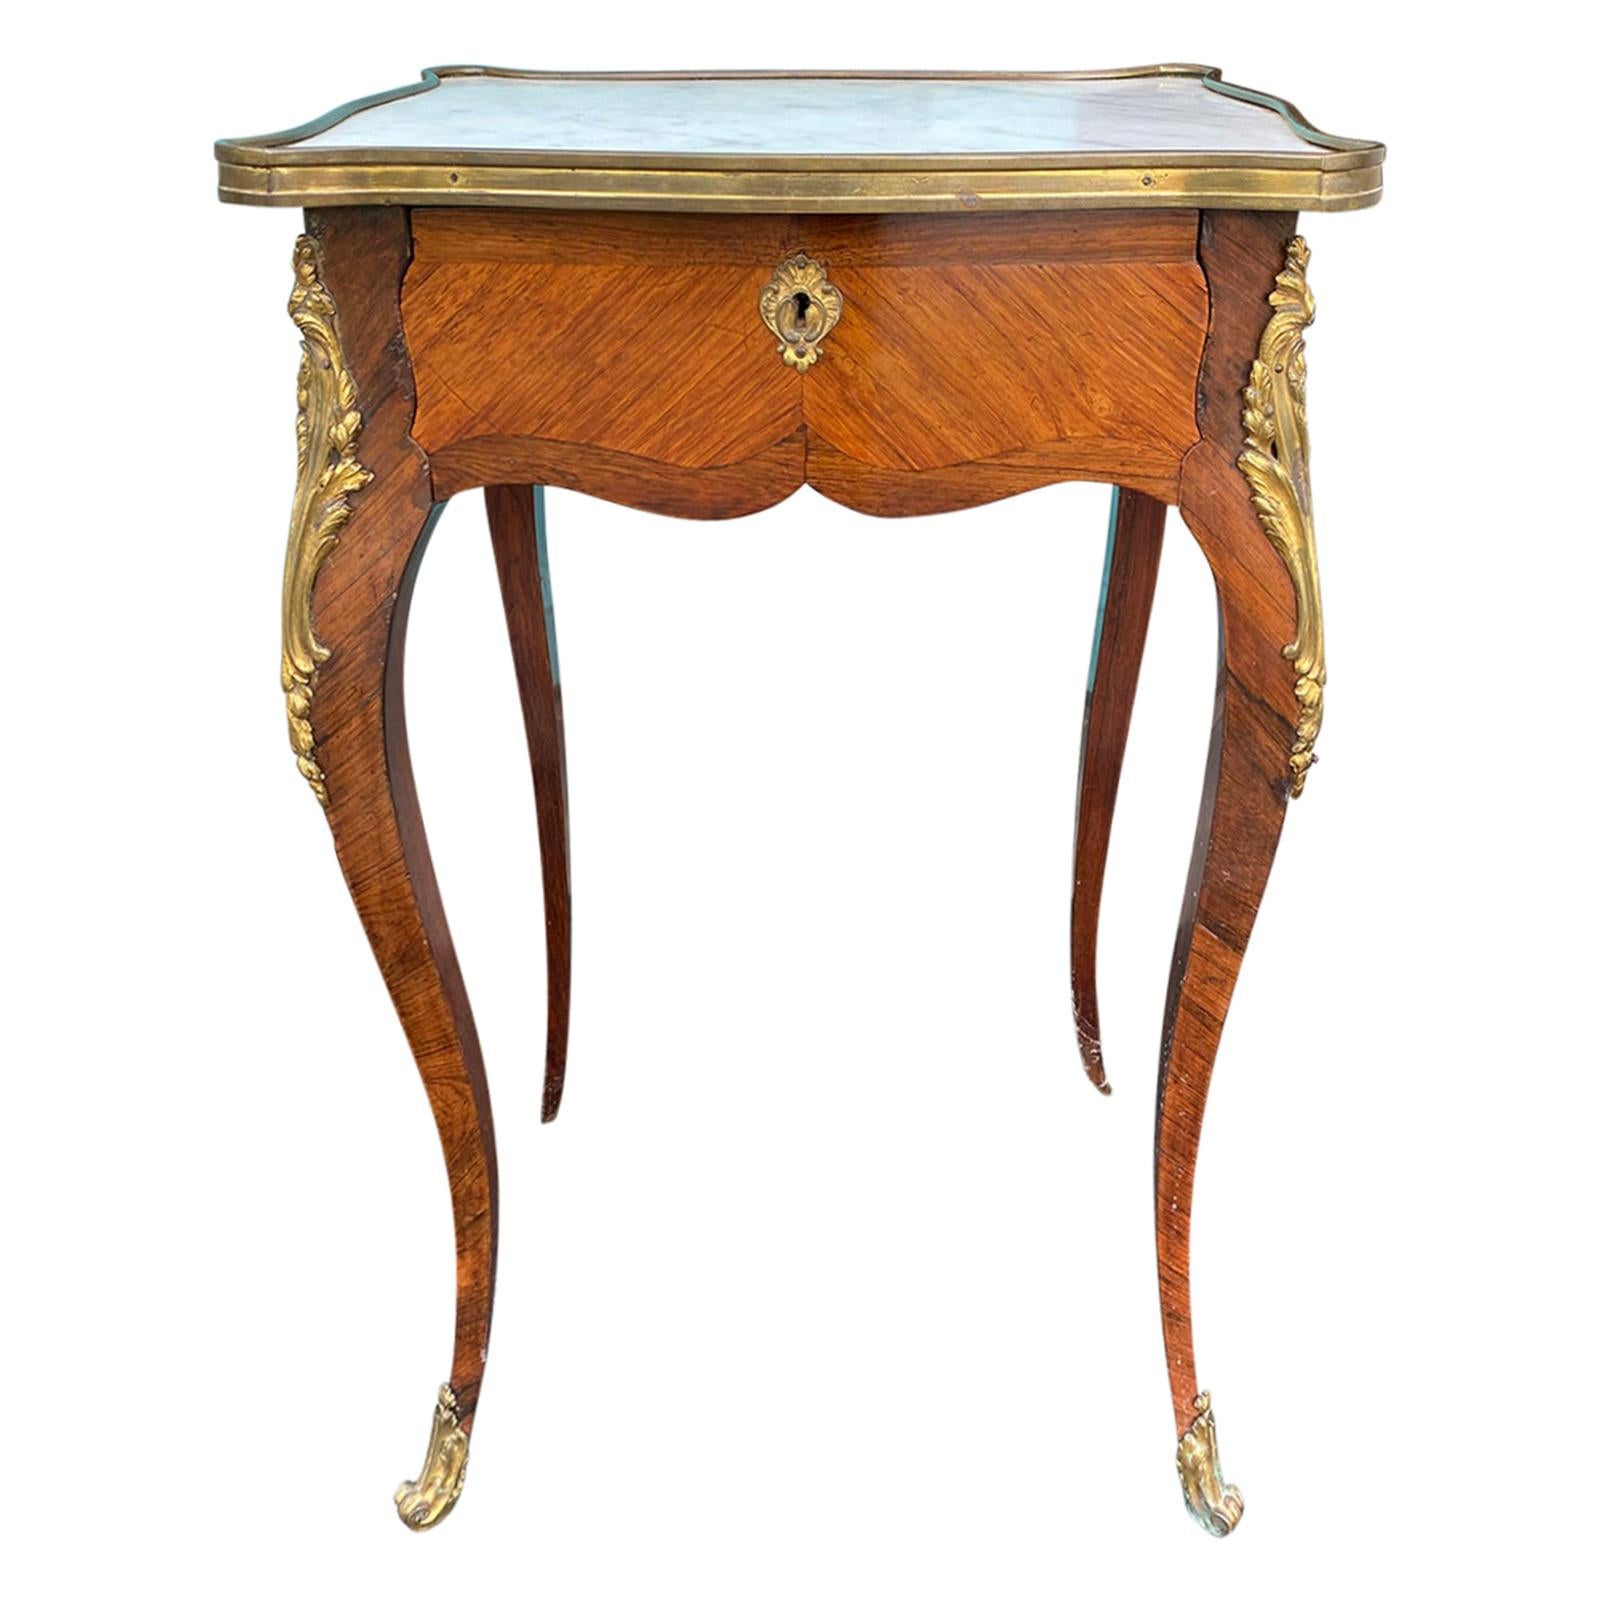 19th Century French Ormolu Mounted Marble Top Side Table, 1 Drawer For Sale